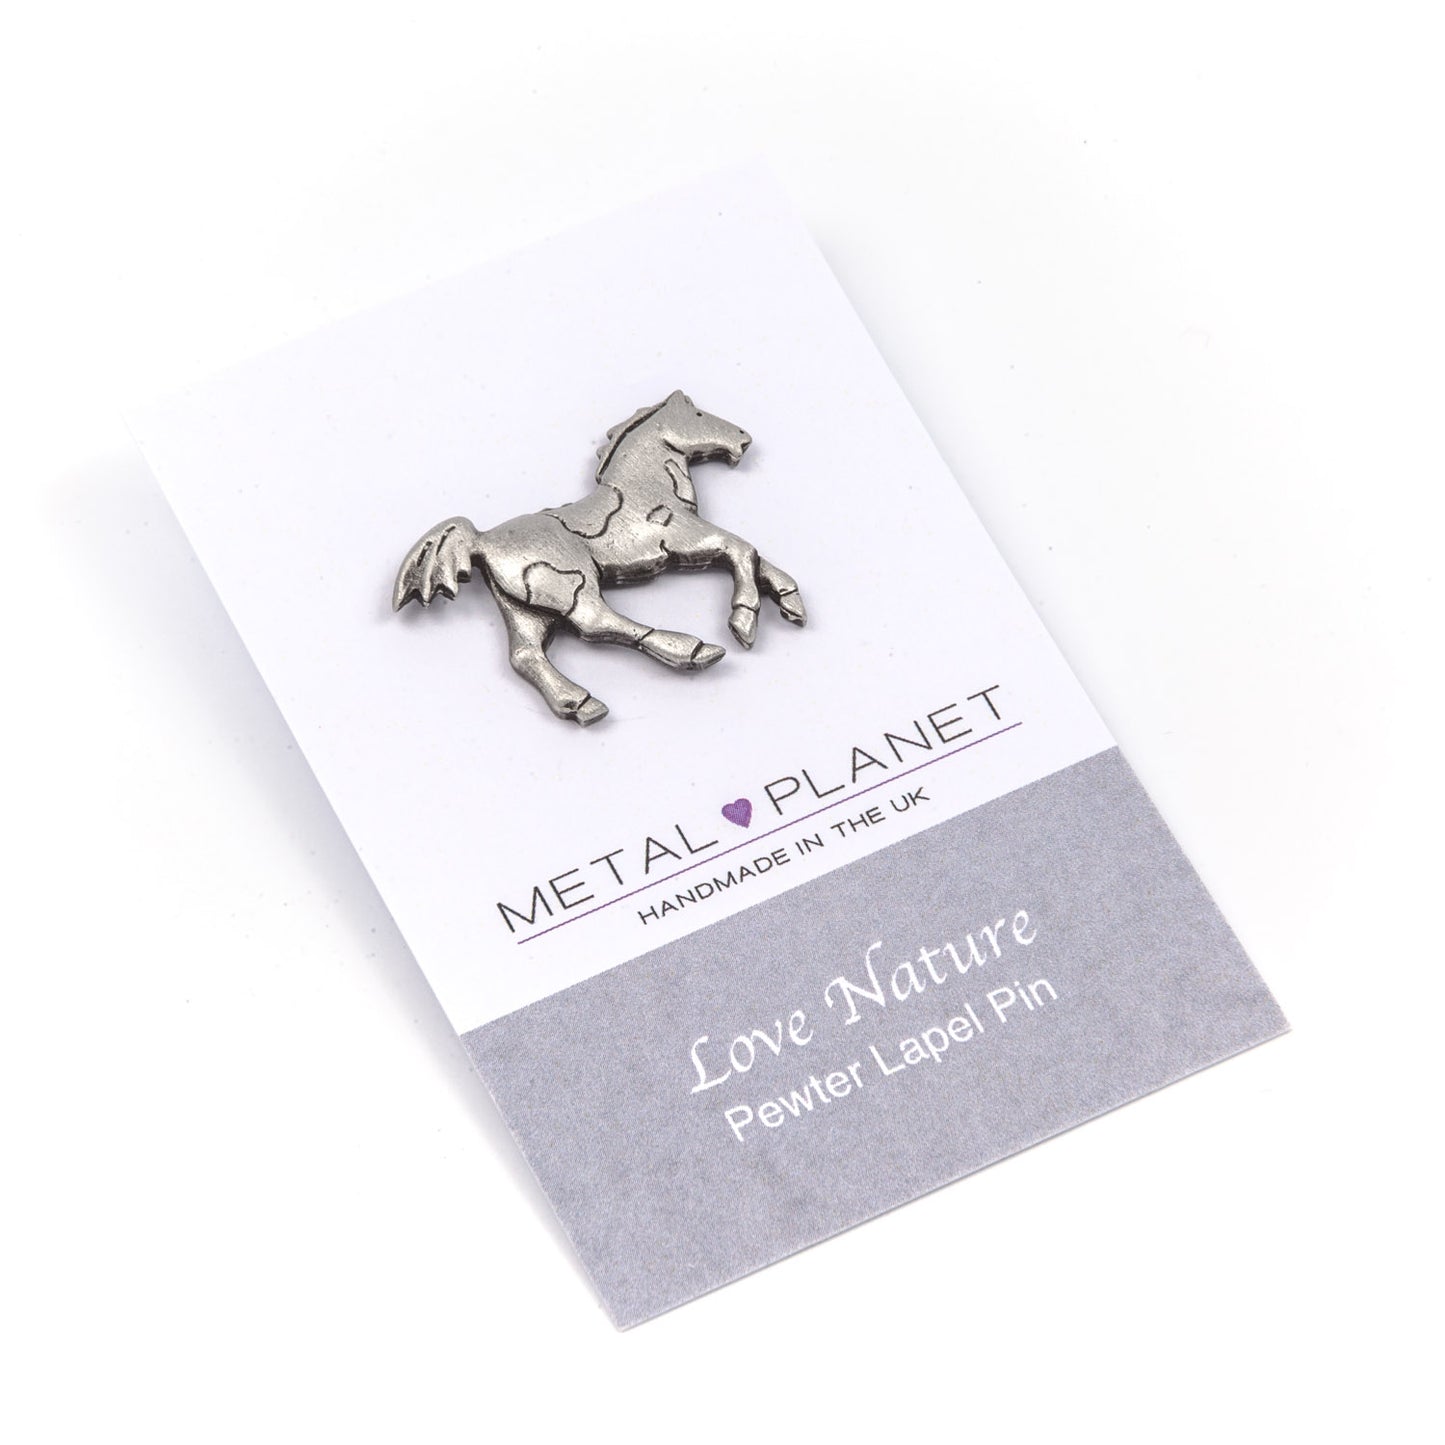 Animal & Nature themed lapel pins